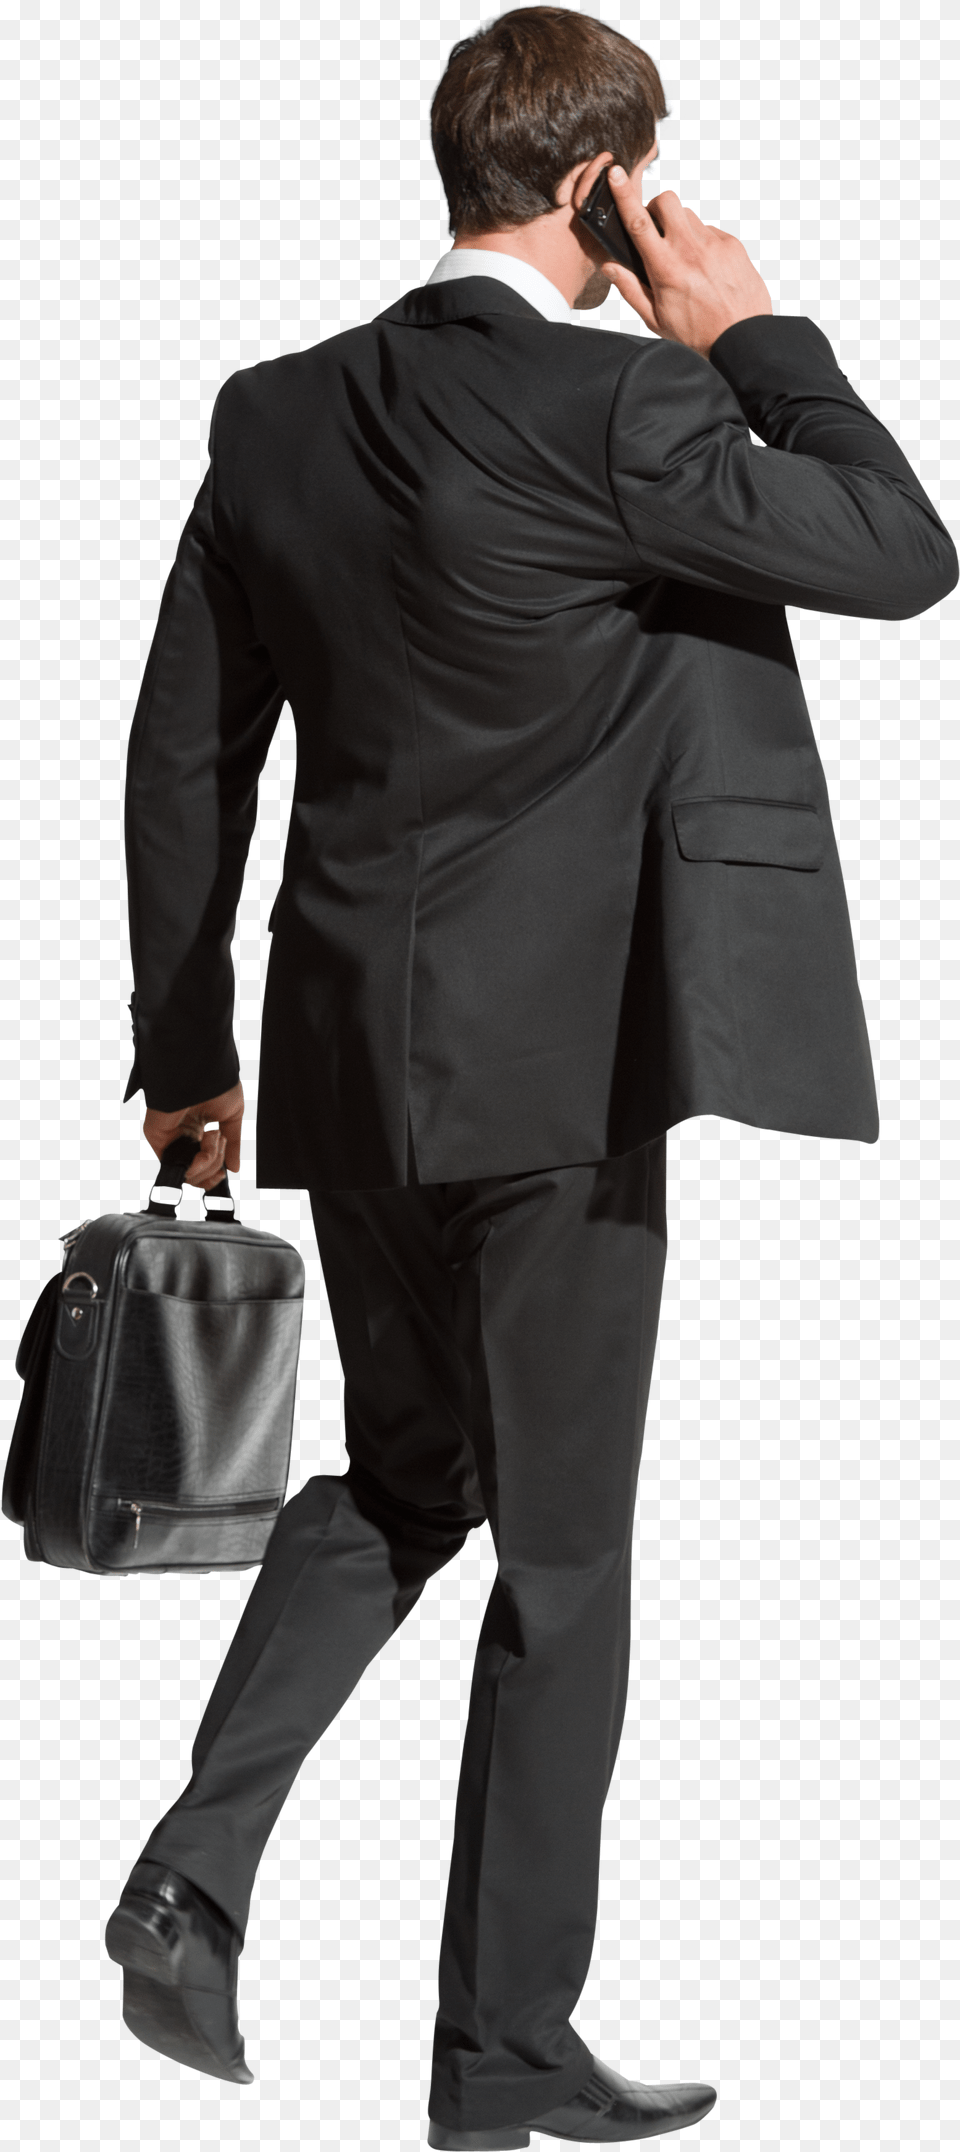 Download Business People Walking Transparent Cut Out People Business, Coat, Bag, Suit, Clothing Png Image